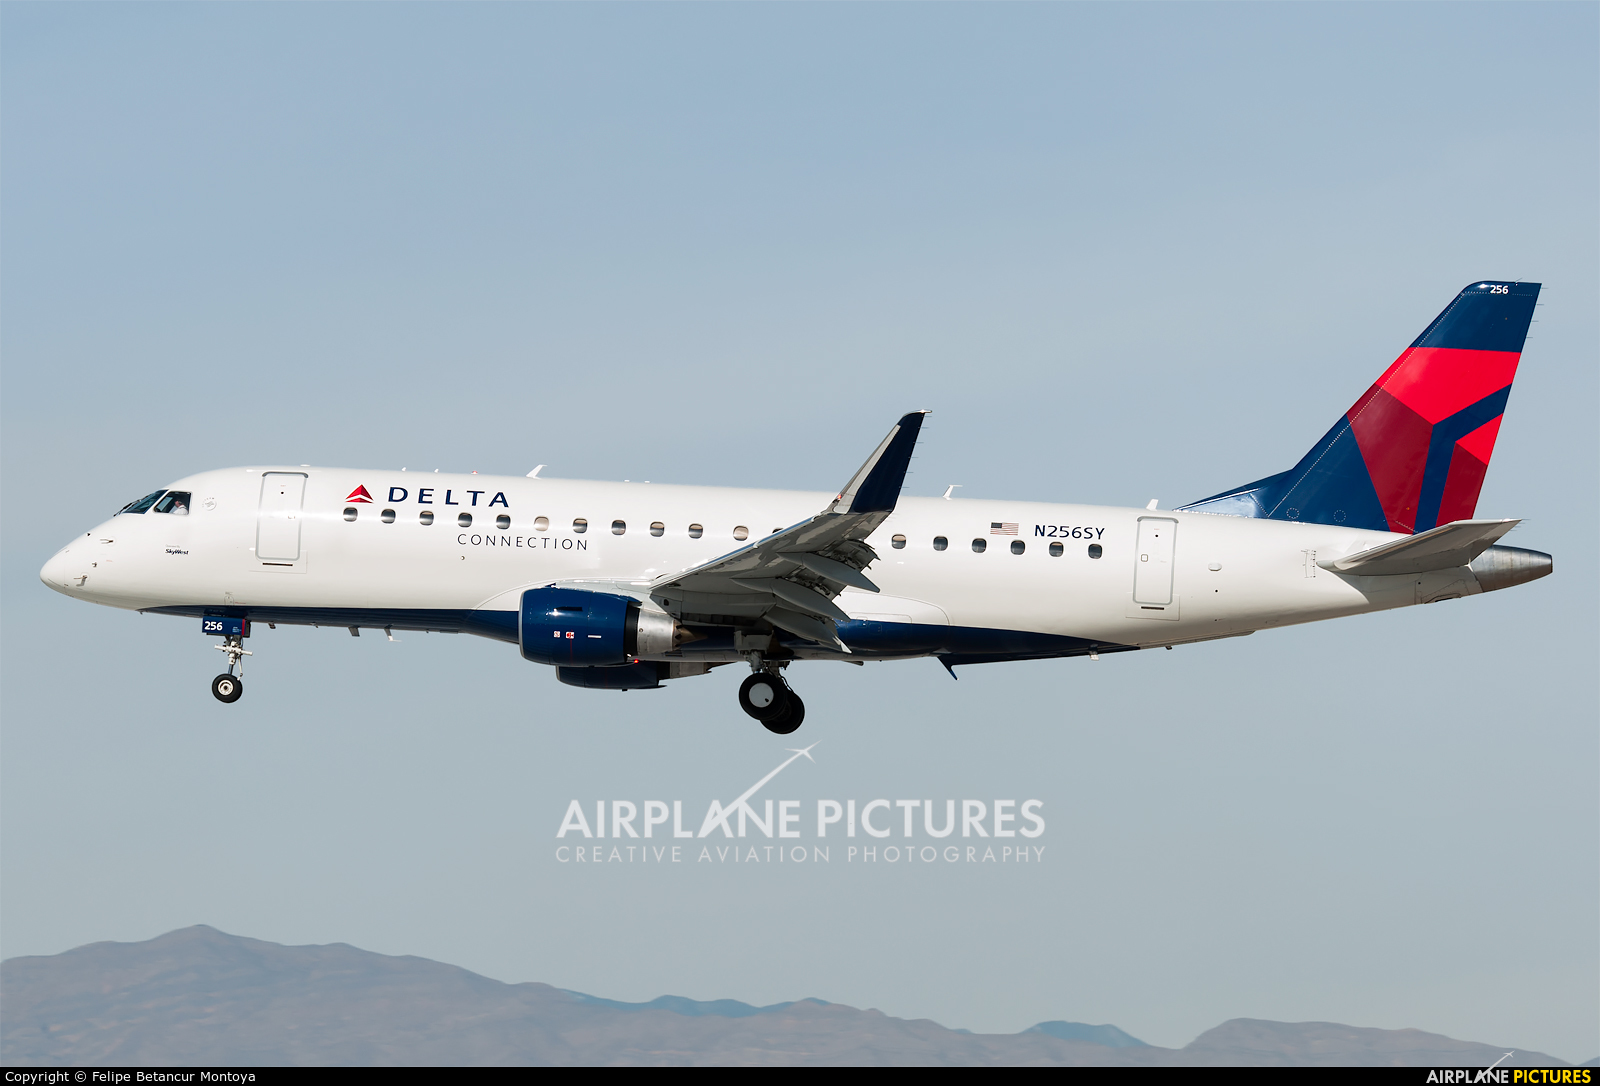 Delta Connection - SkyWest Airlines N256SY aircraft at Las Vegas - McCarran Intl